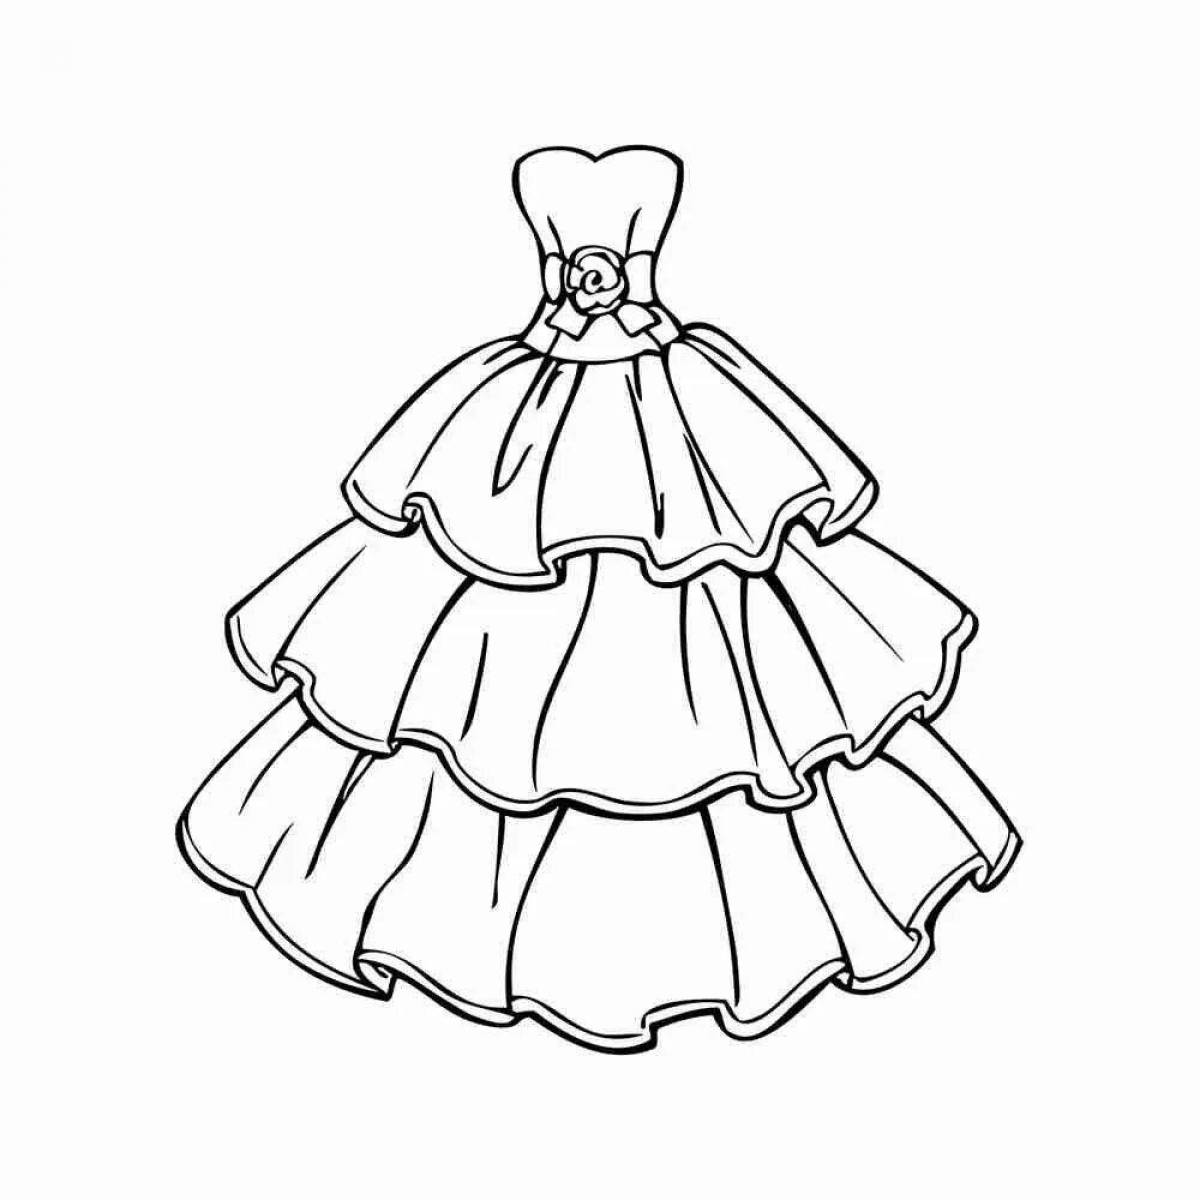 Coloring page dazzling dress for children